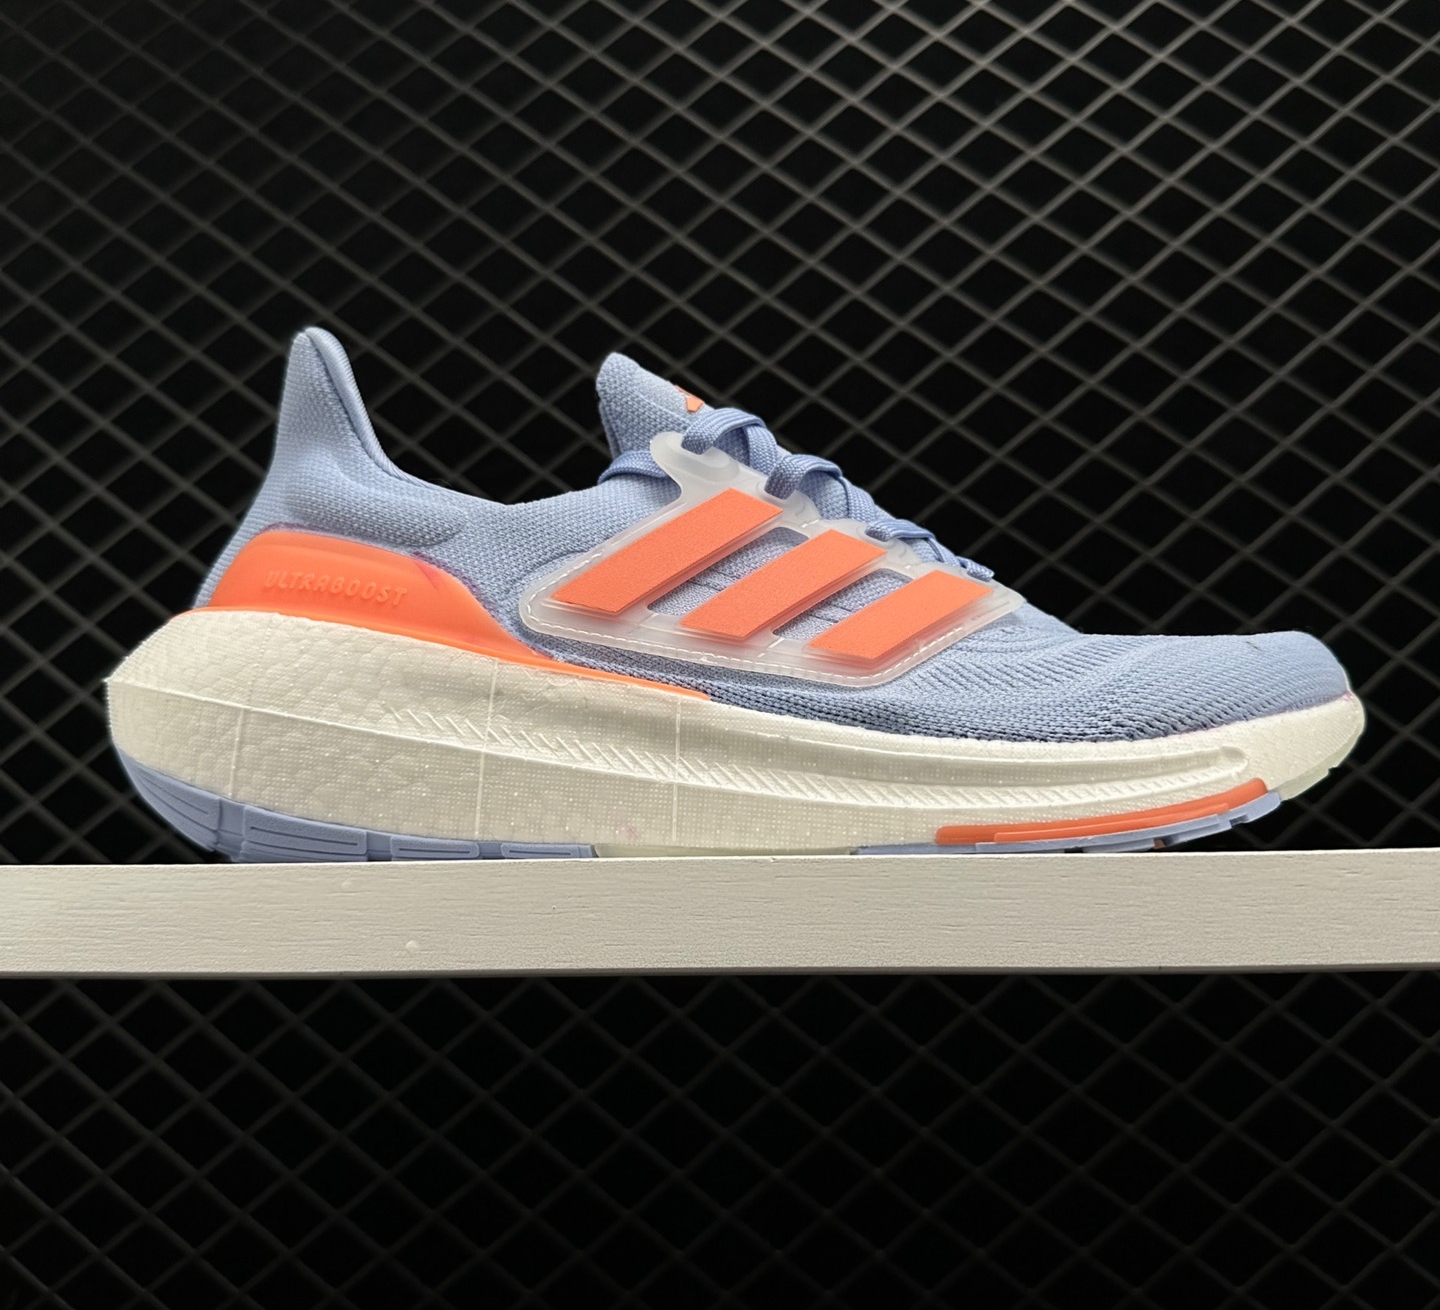 Adidas UltraBoost Light Blue Dawn Coral - Premium Quality Sneakers